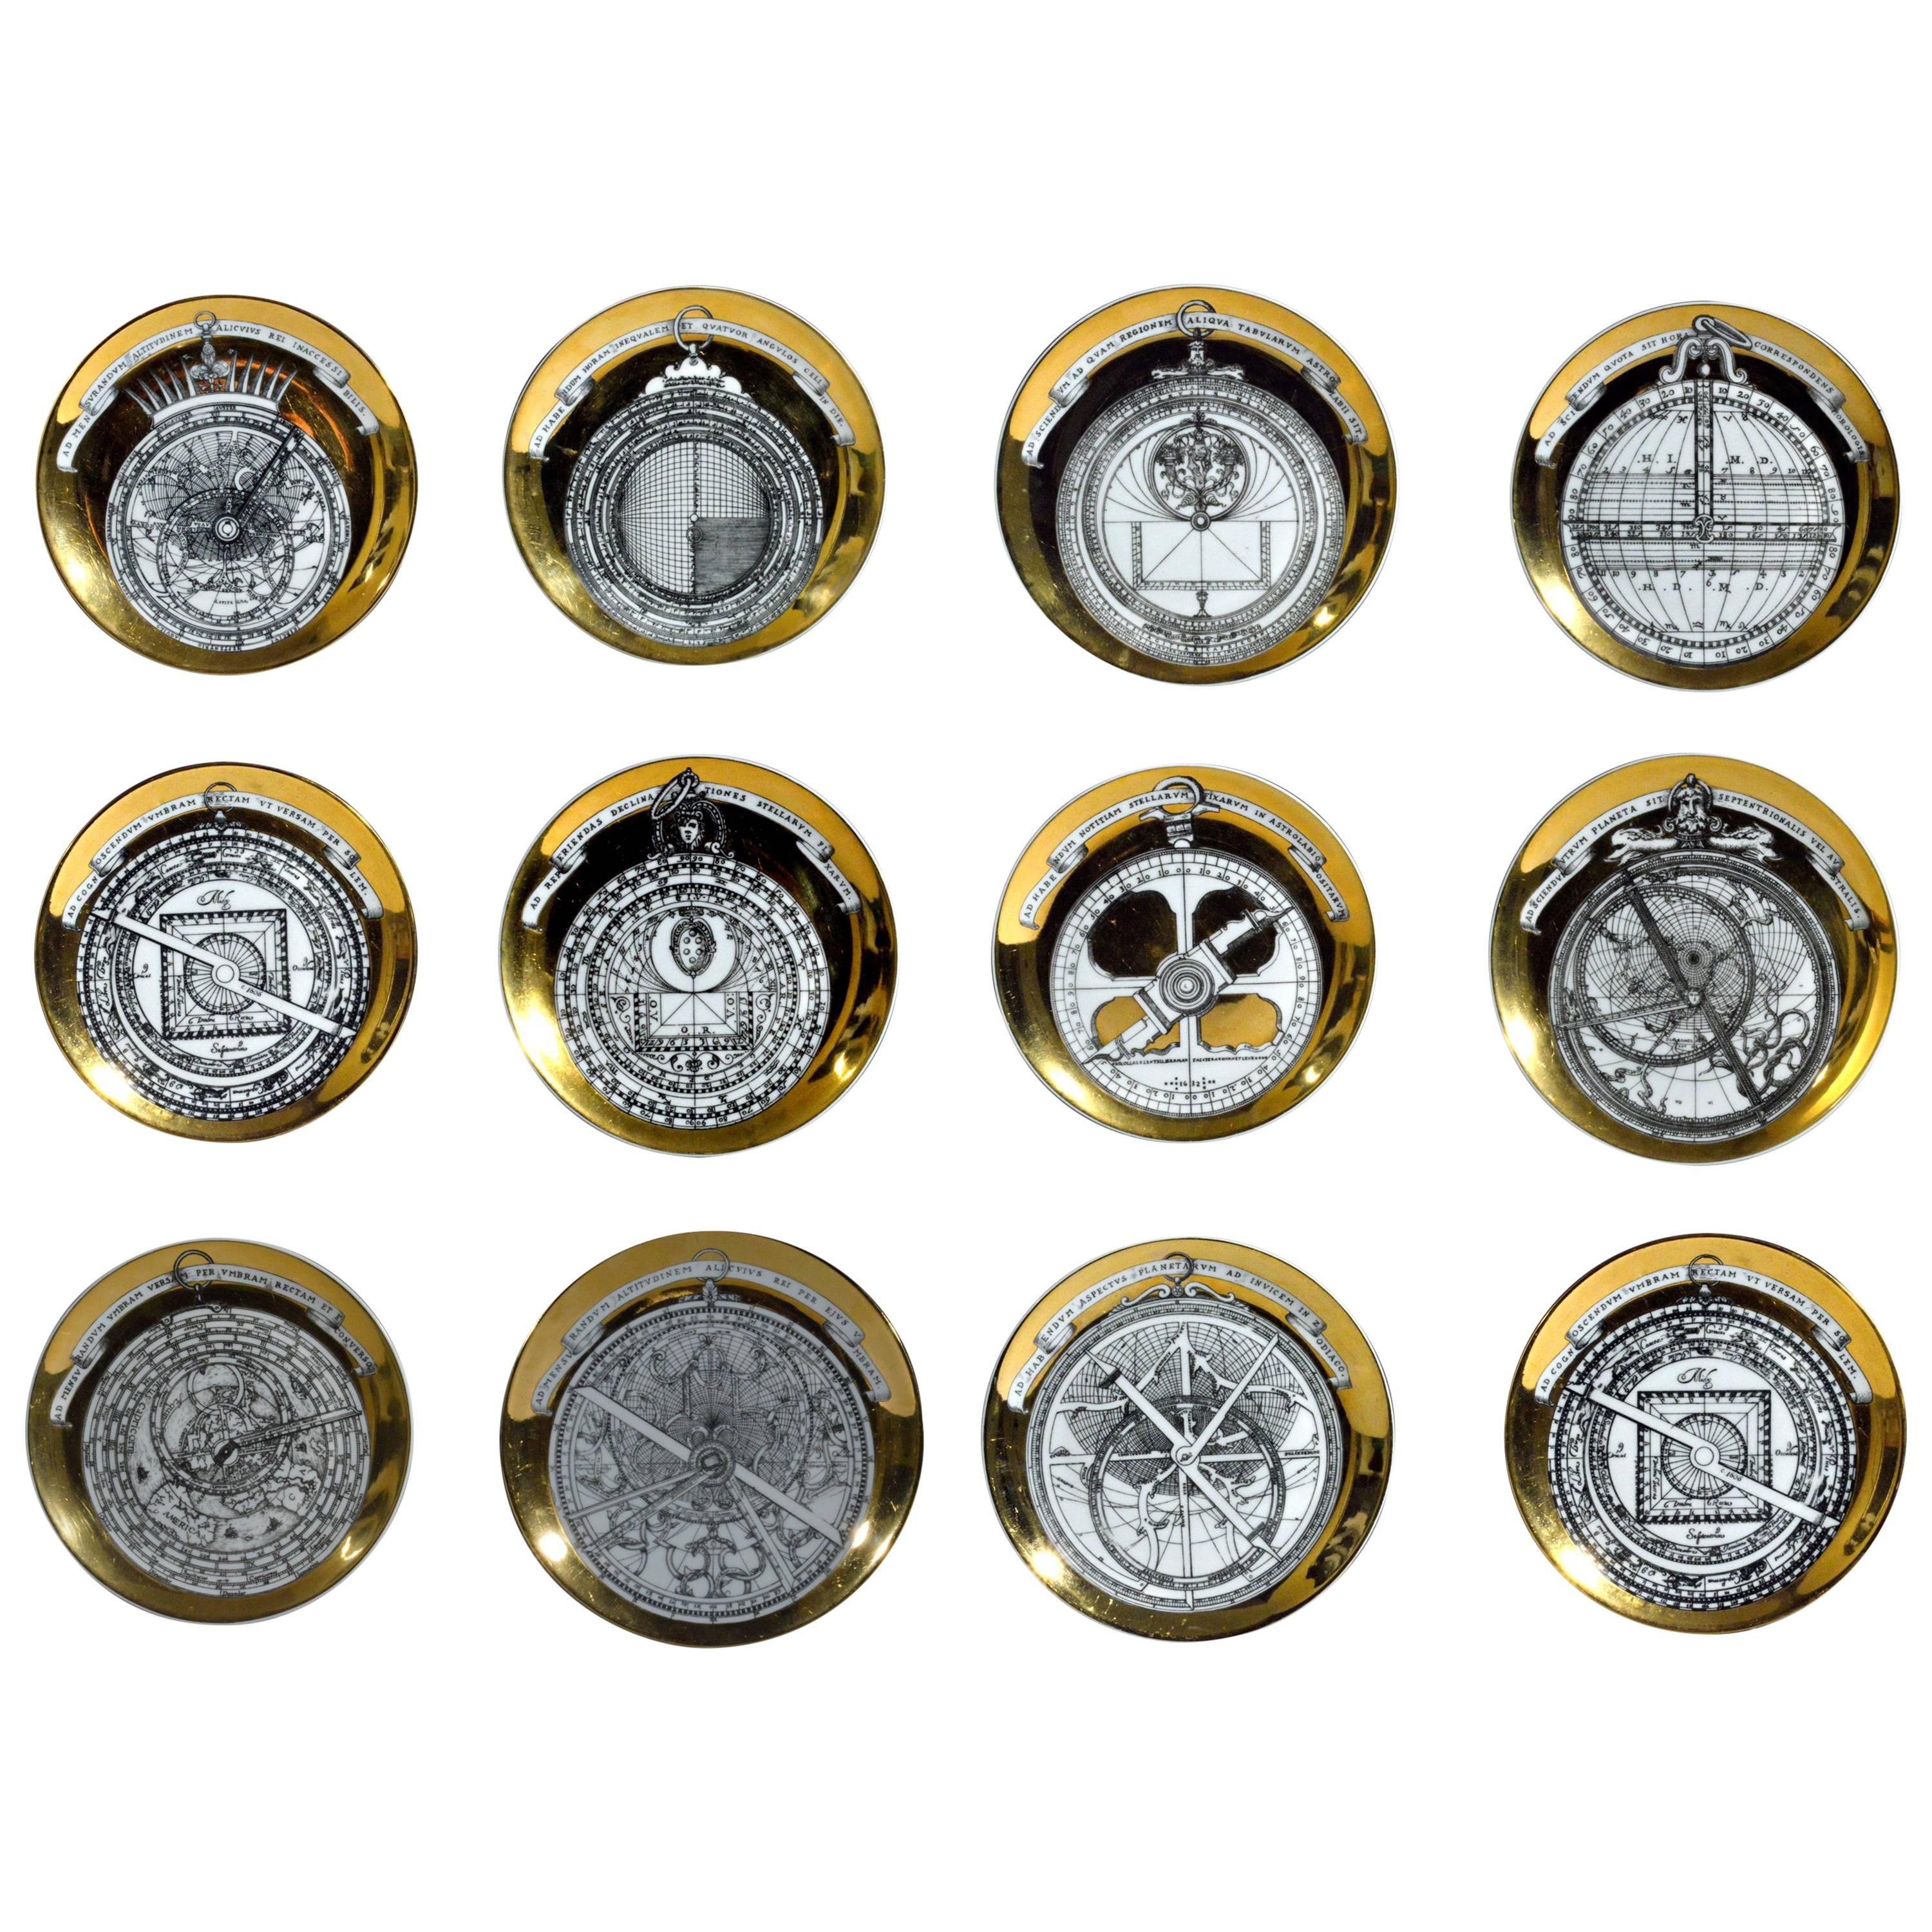 Piero Fornasetti Porcelain Astrolabe Plates in a Complete Set of Twelve